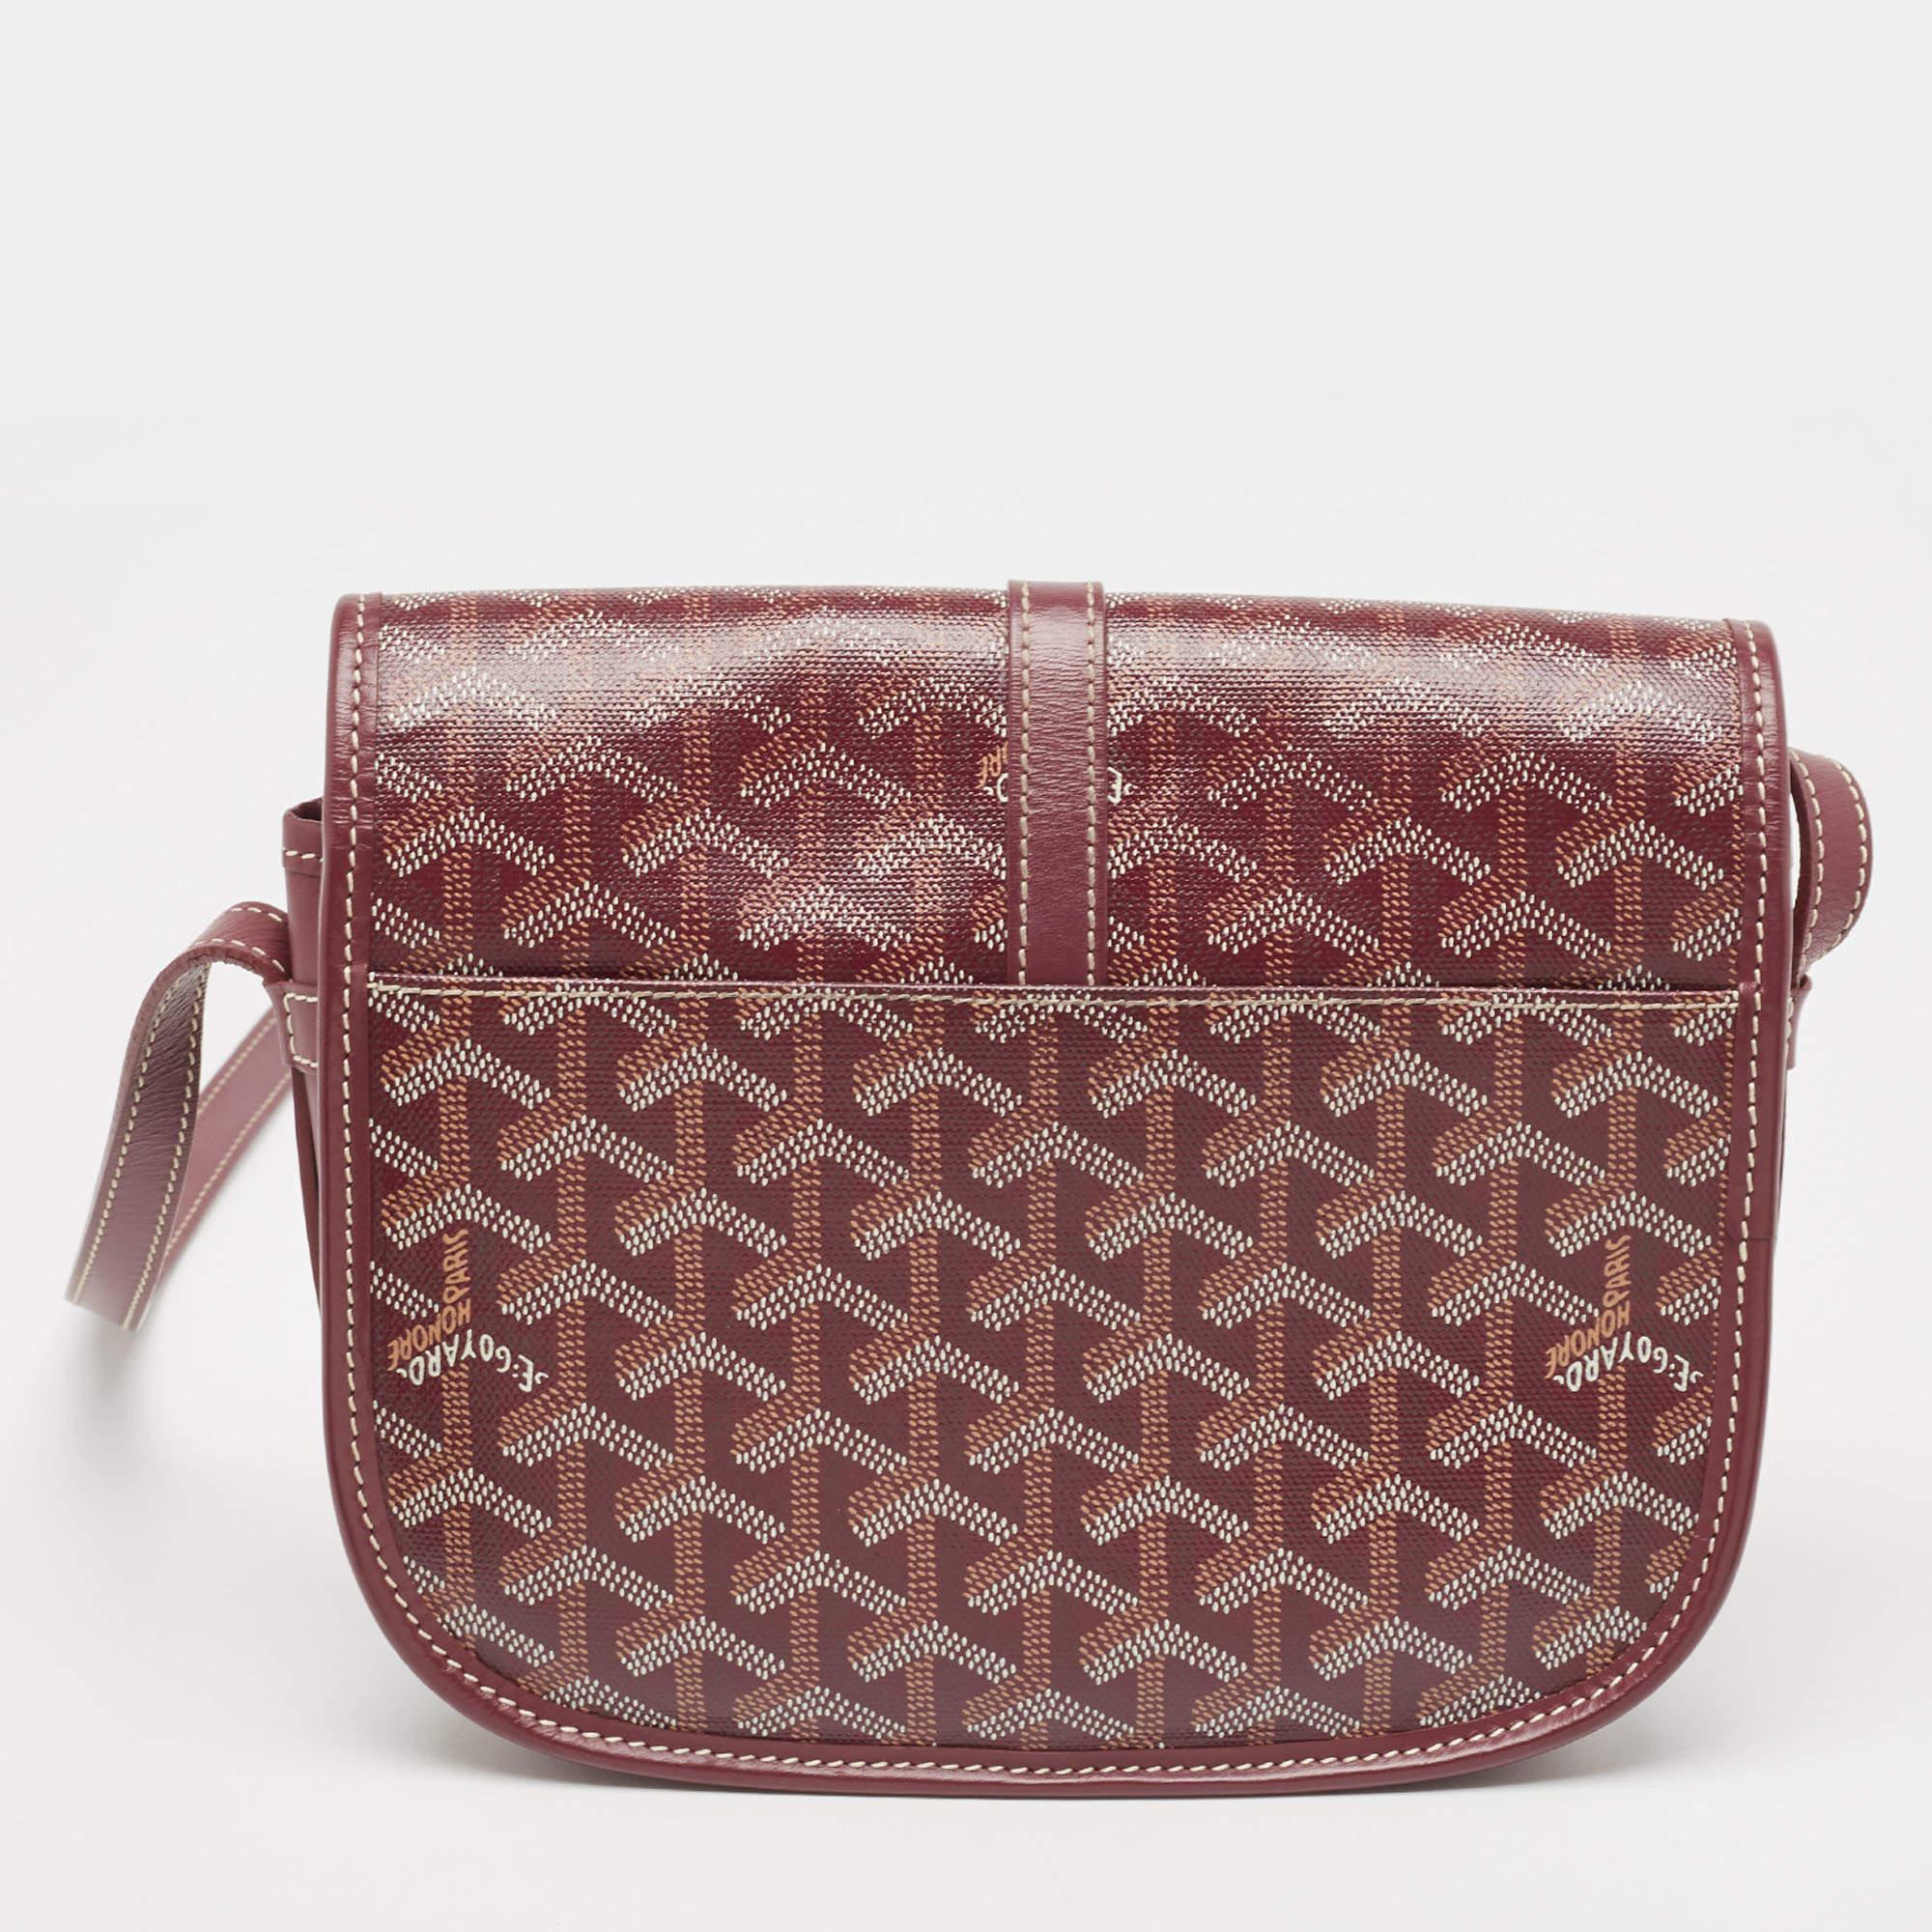 Indulge in luxury with this Goyard shoulder bag. Meticulously crafted from premium materials, it combines exquisite design, impeccable craftsmanship, and timeless elegance. Elevate your style with this iconic fashion accessory.

Includes: Original